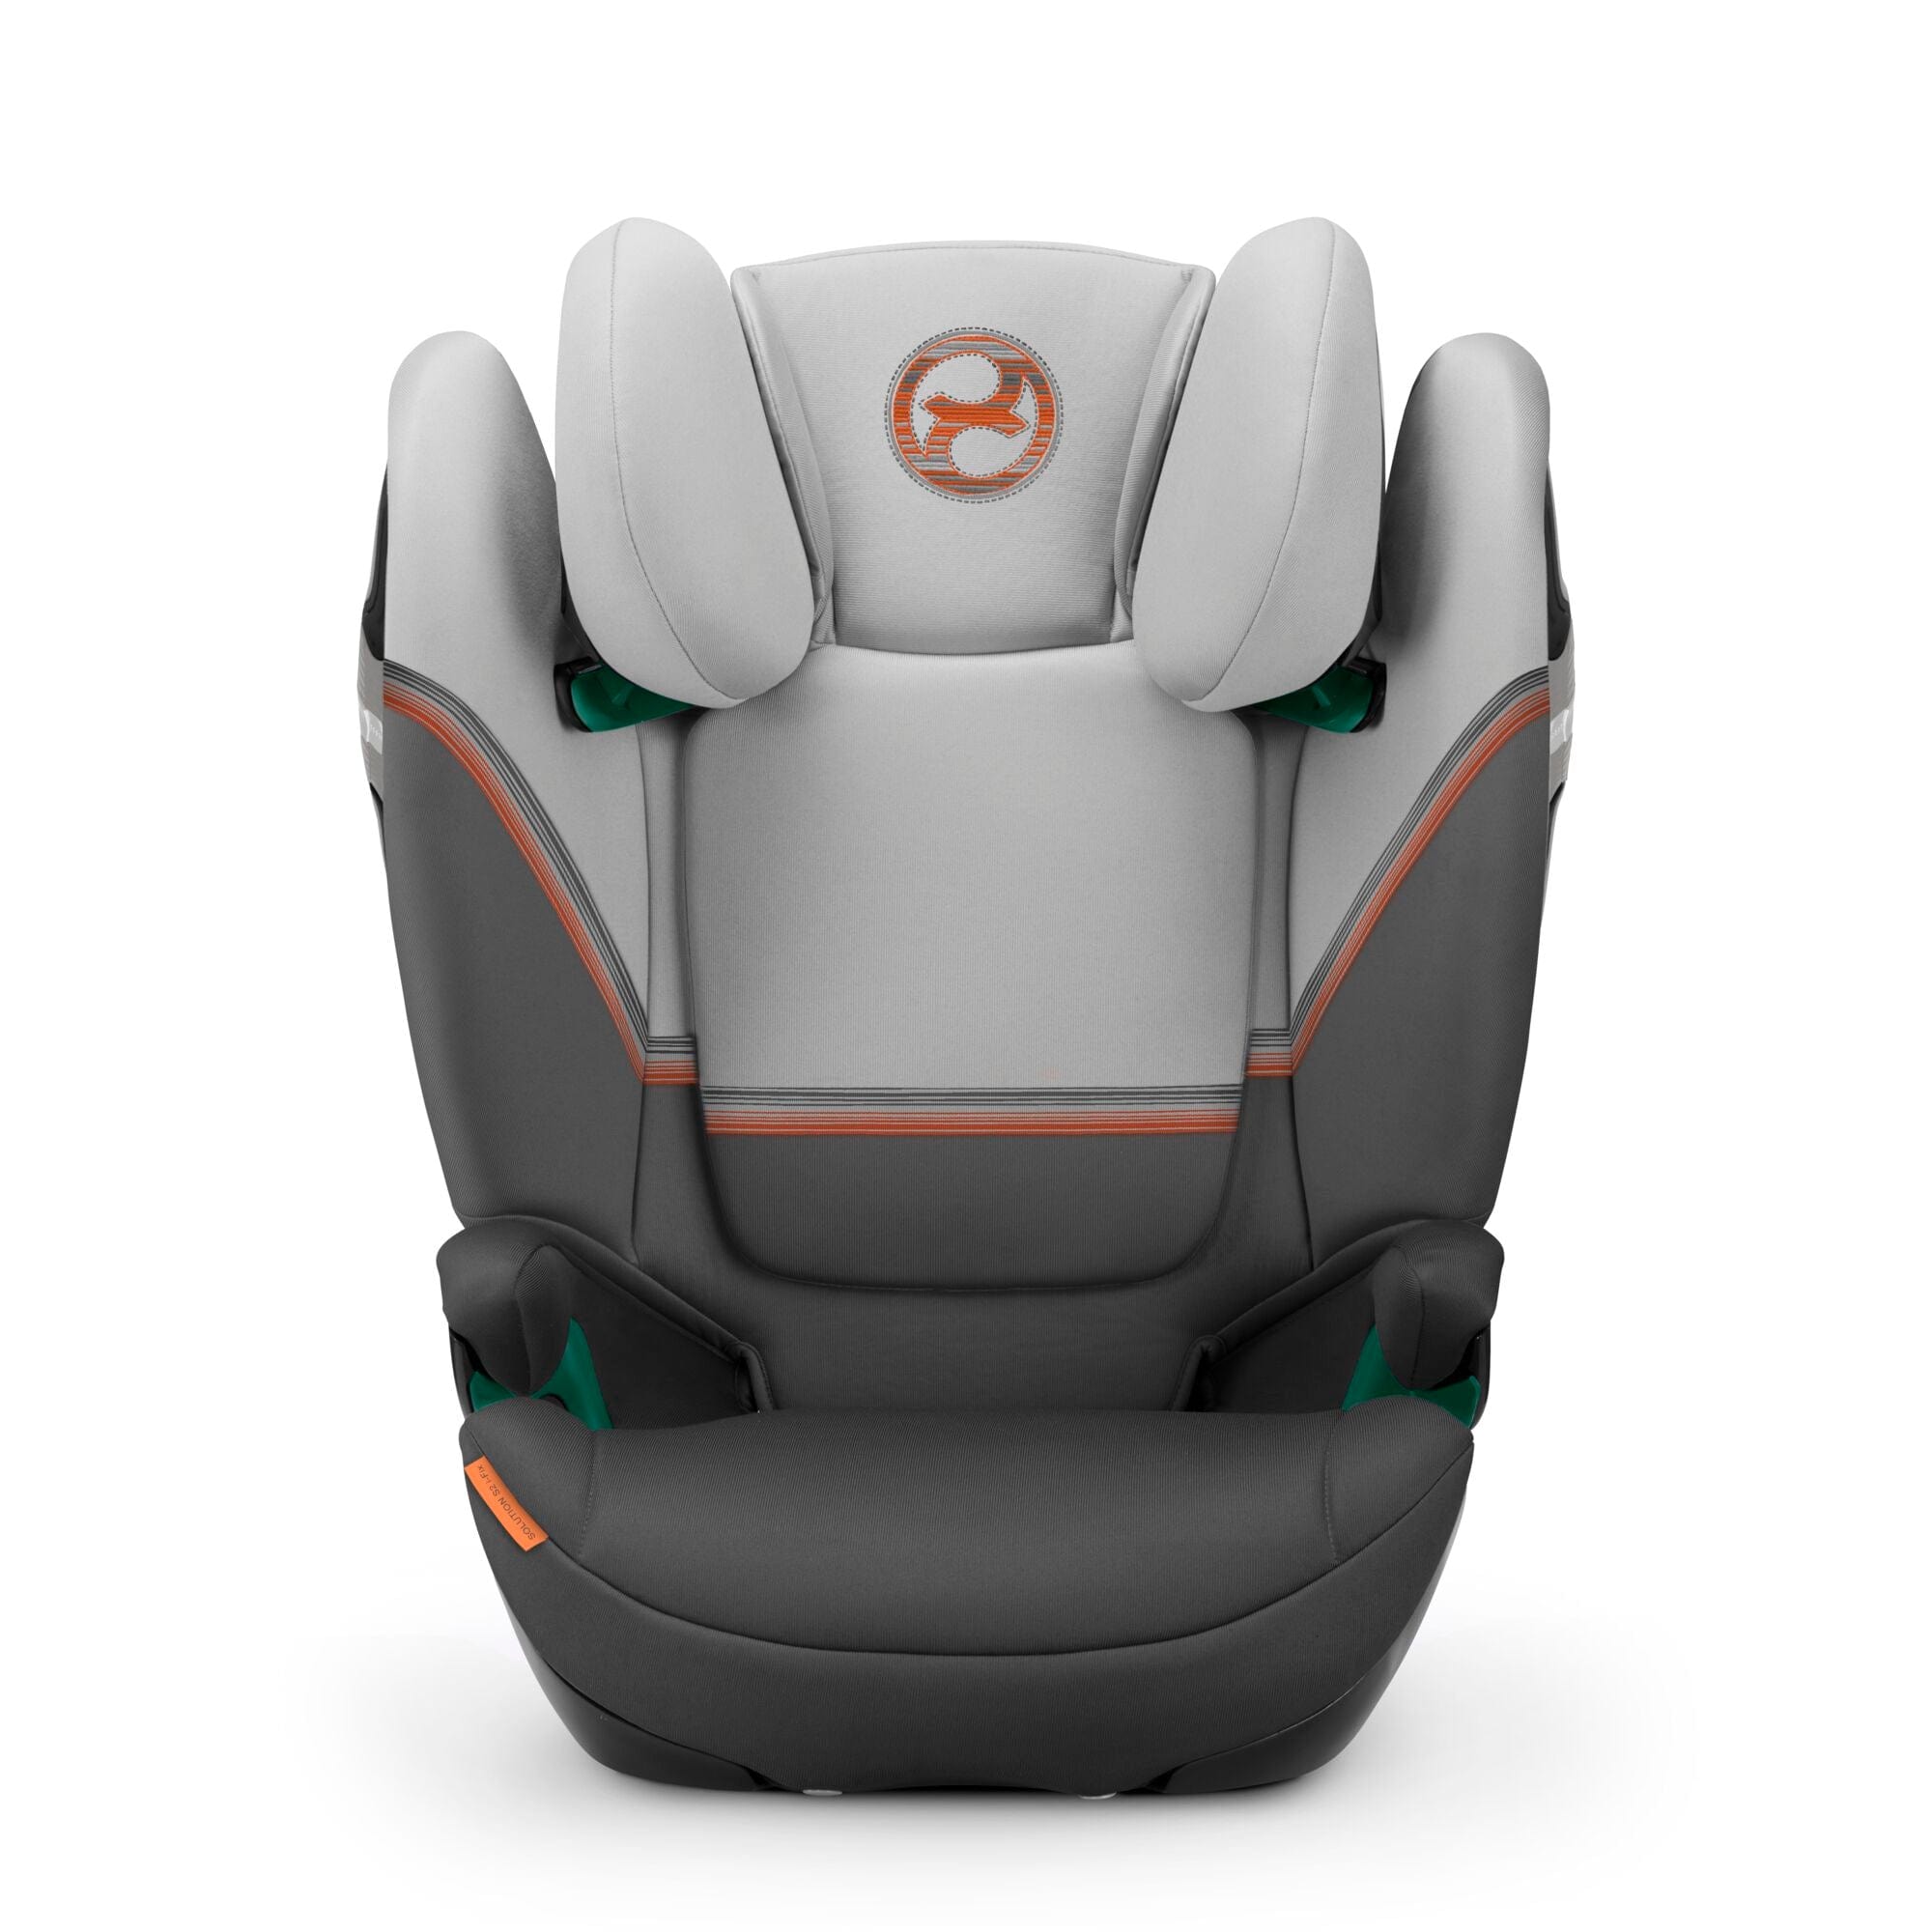 Cybex Solution S2 i-FIX High Back Booster Lava Grey Highback Booster Seats 522002264 4063846310401